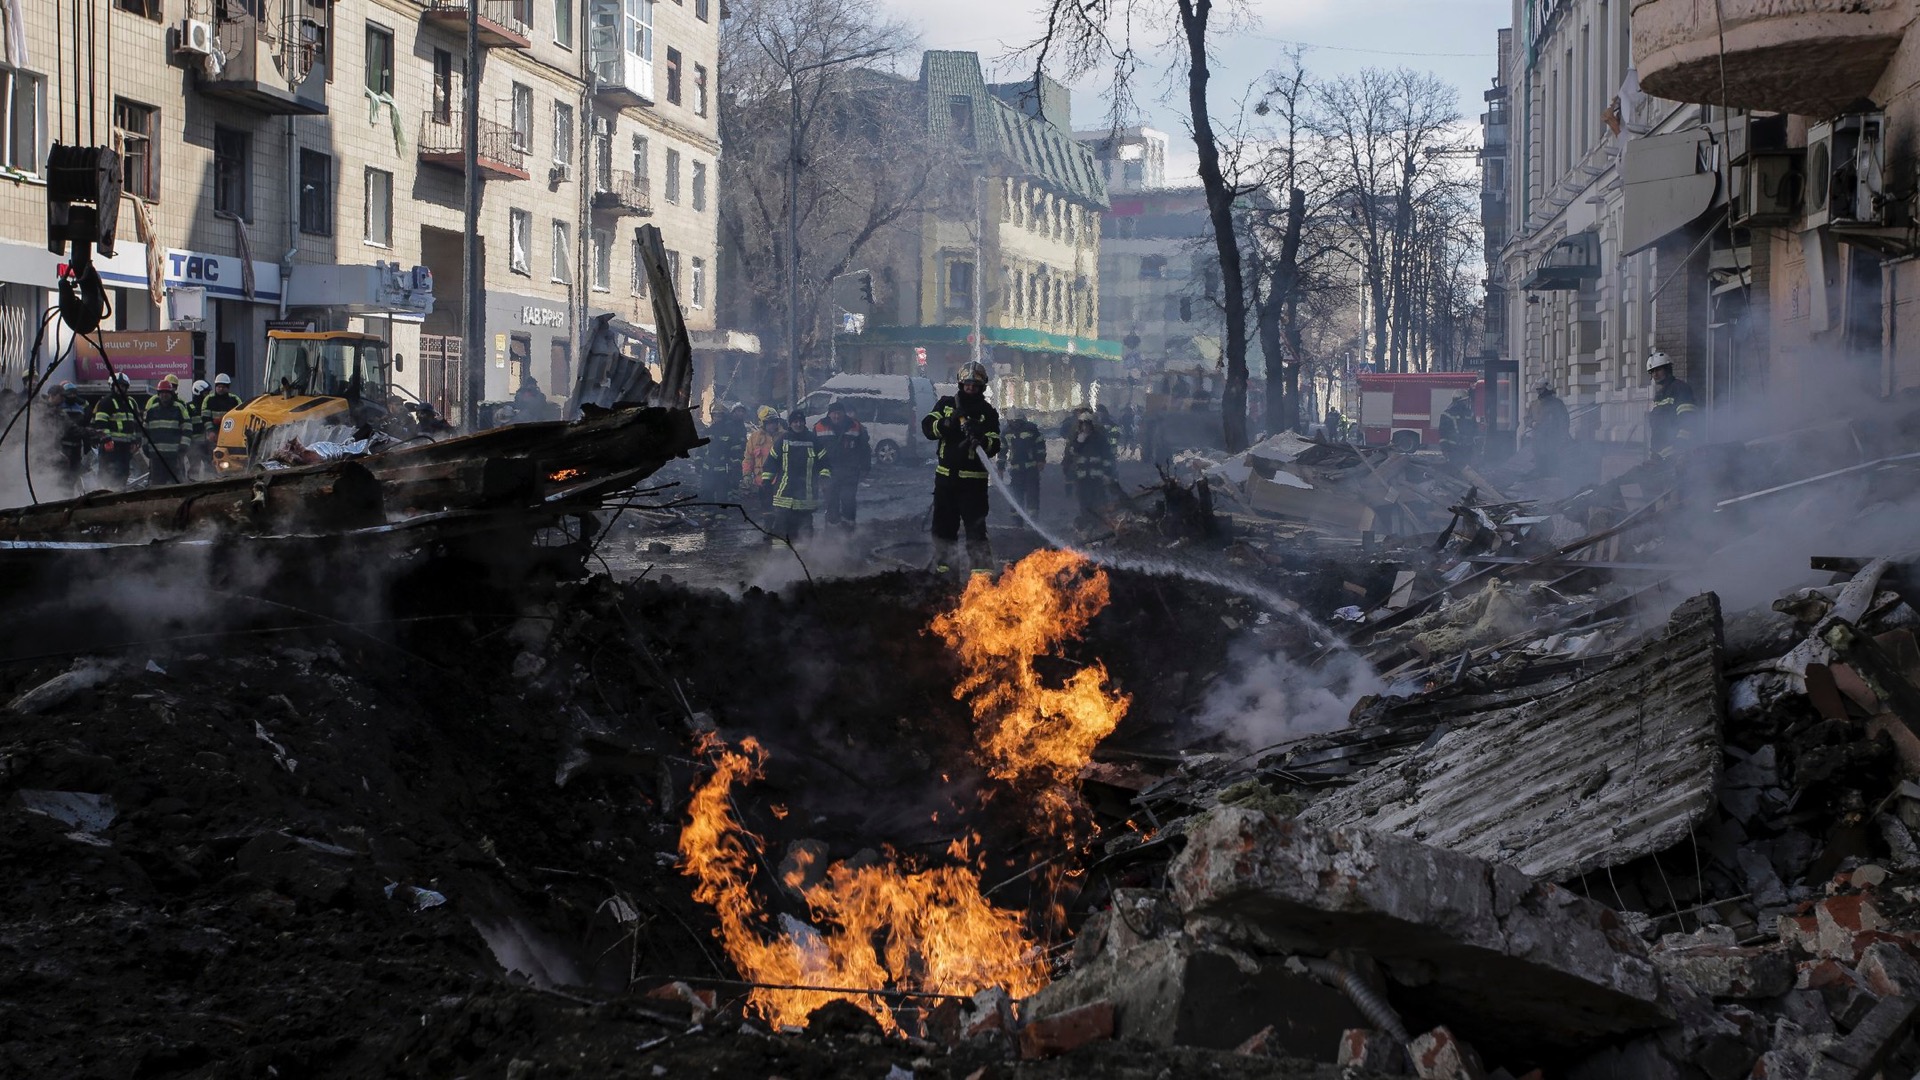 Firefighters extinguish flames outside an apartment house after a Russian rocket attack in Kharkiv, Ukraine's second-largest city, Ukraine, Monday, March 14, 2022. (AP Photo/Pavel Dorogoy)